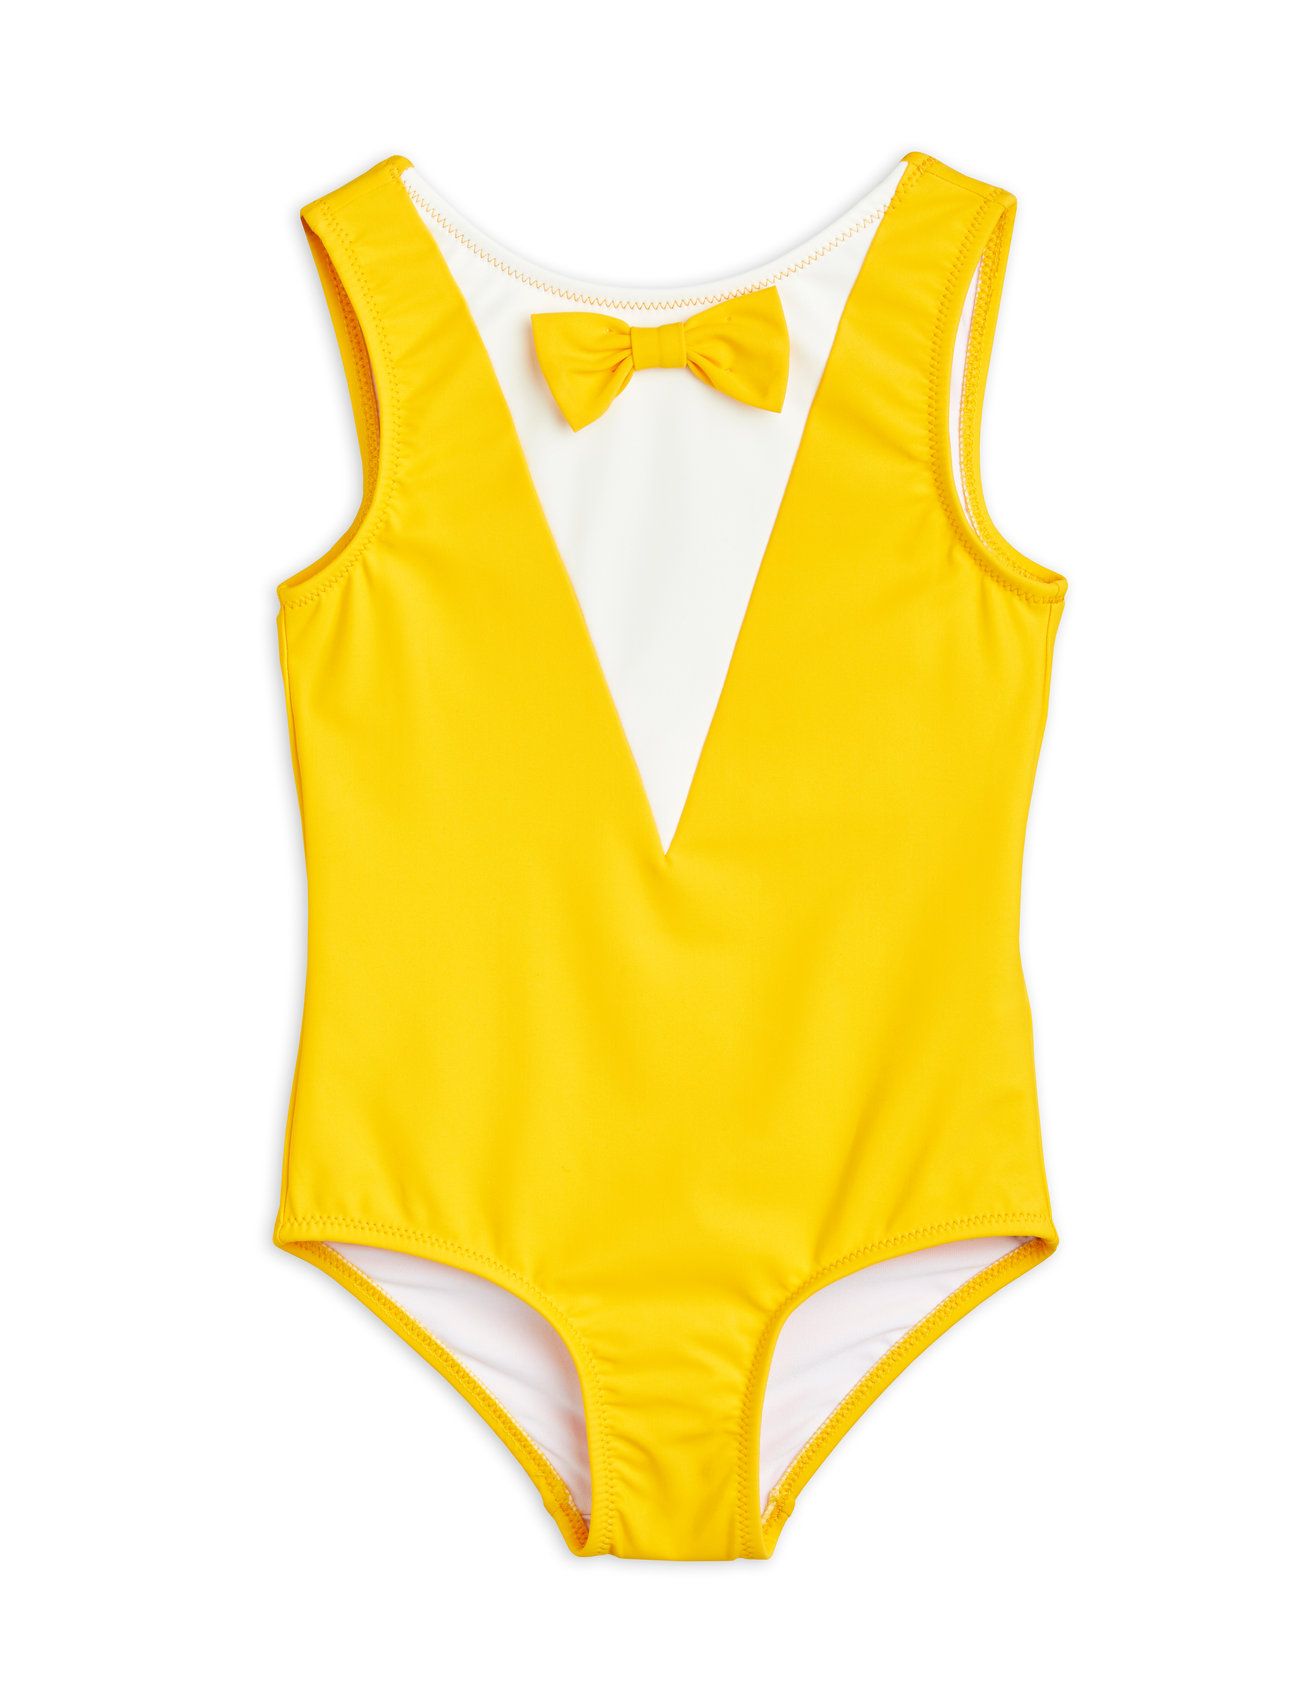 Rodini Bow Swimsuit Badedragter - Boozt.com